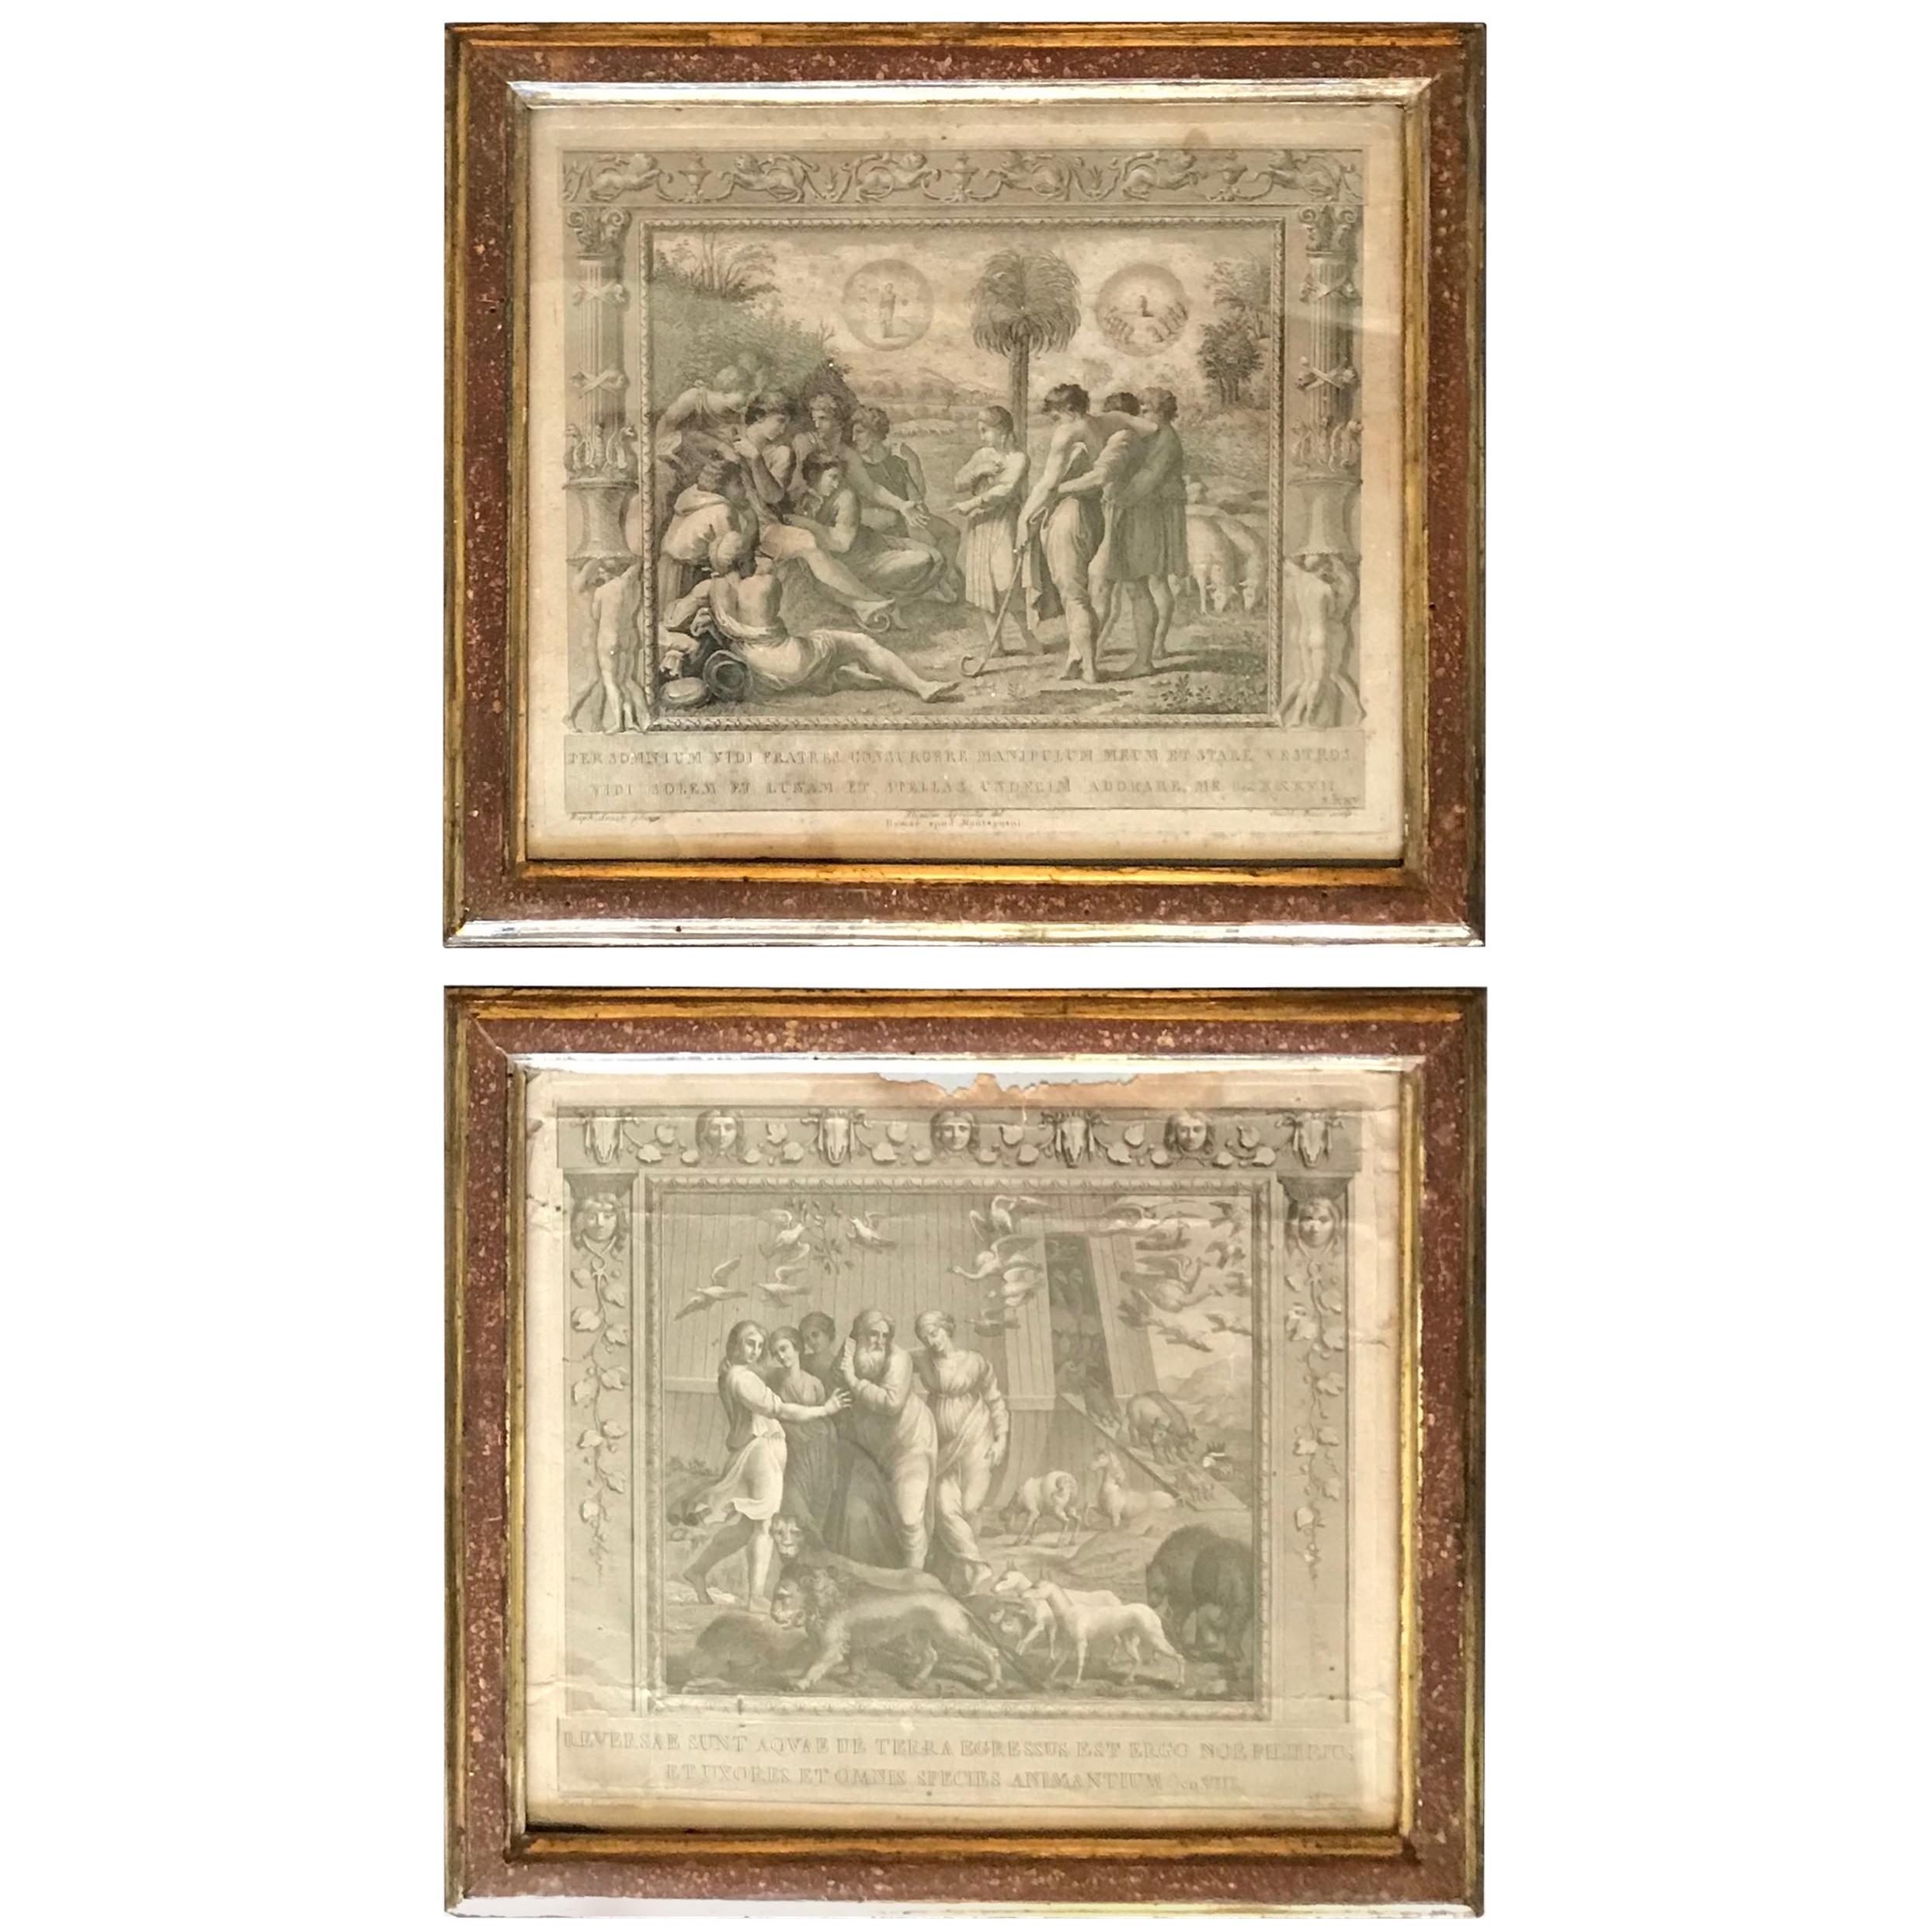 Pair of Engravings in 18th Century Faux Porphyry and Gilt Frames